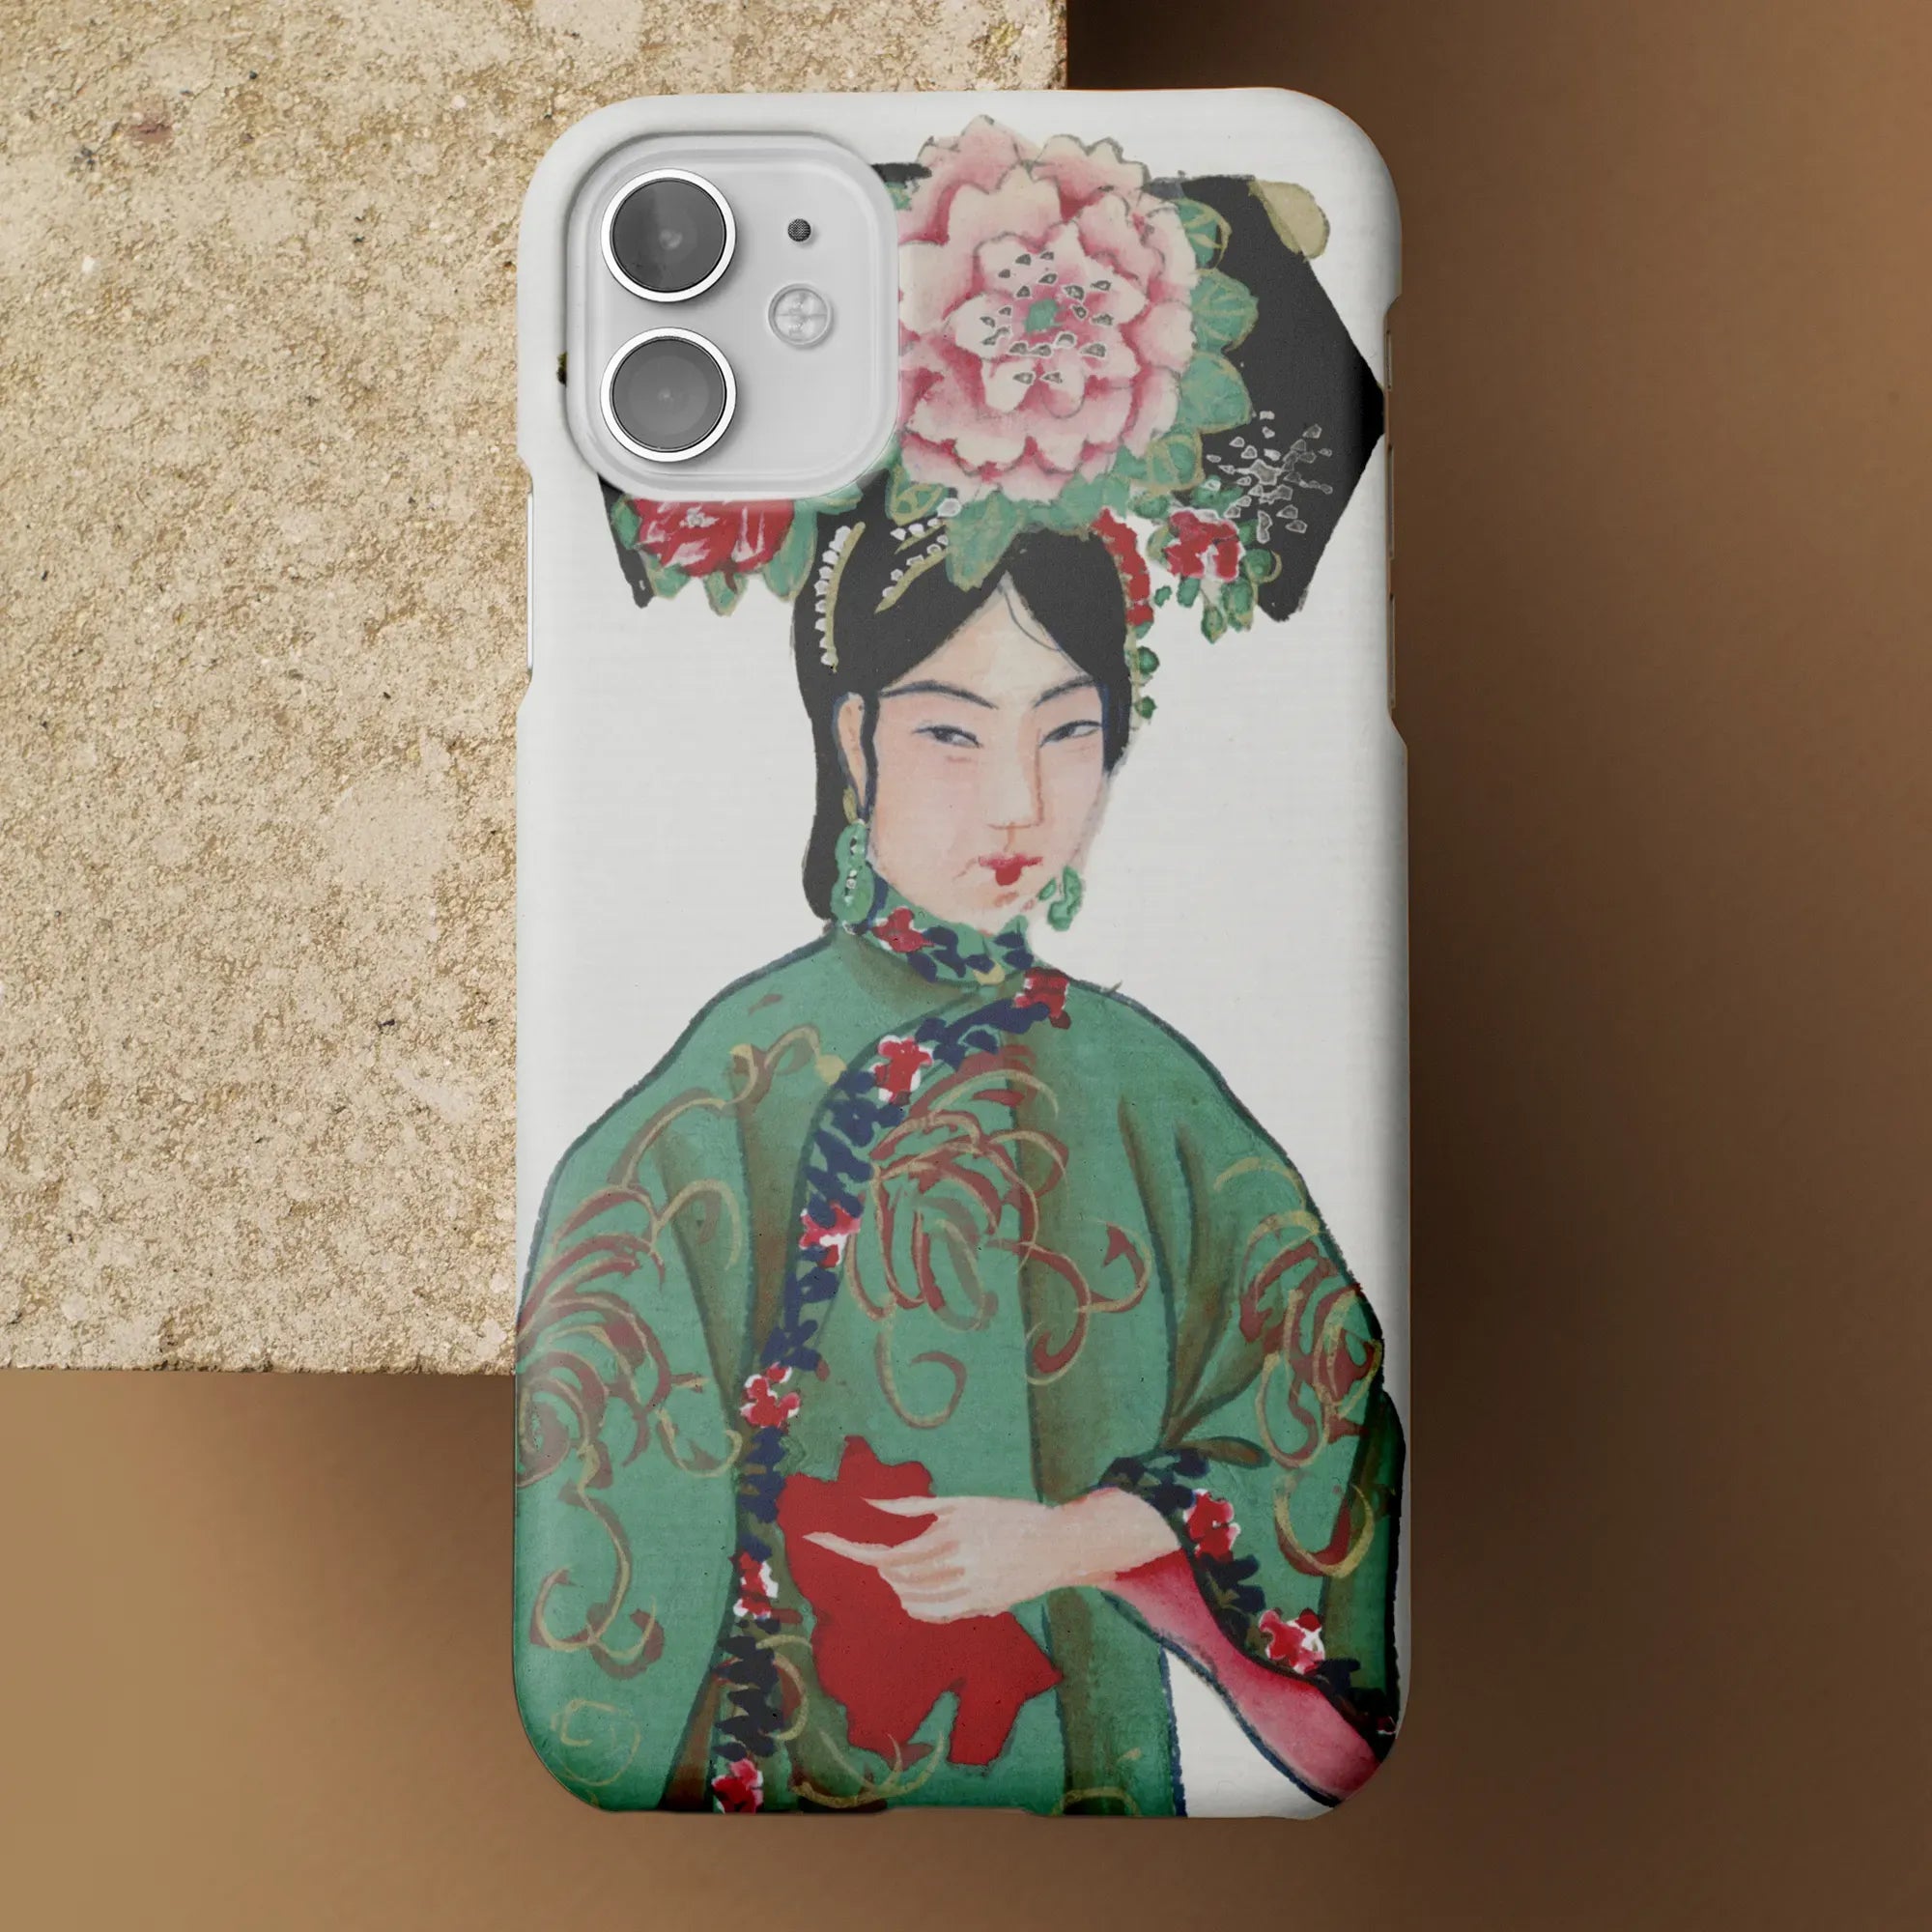 Chinese Noblewoman In Manchu Couture Art Phone Case - Mobile Phone Cases - Aesthetic Art